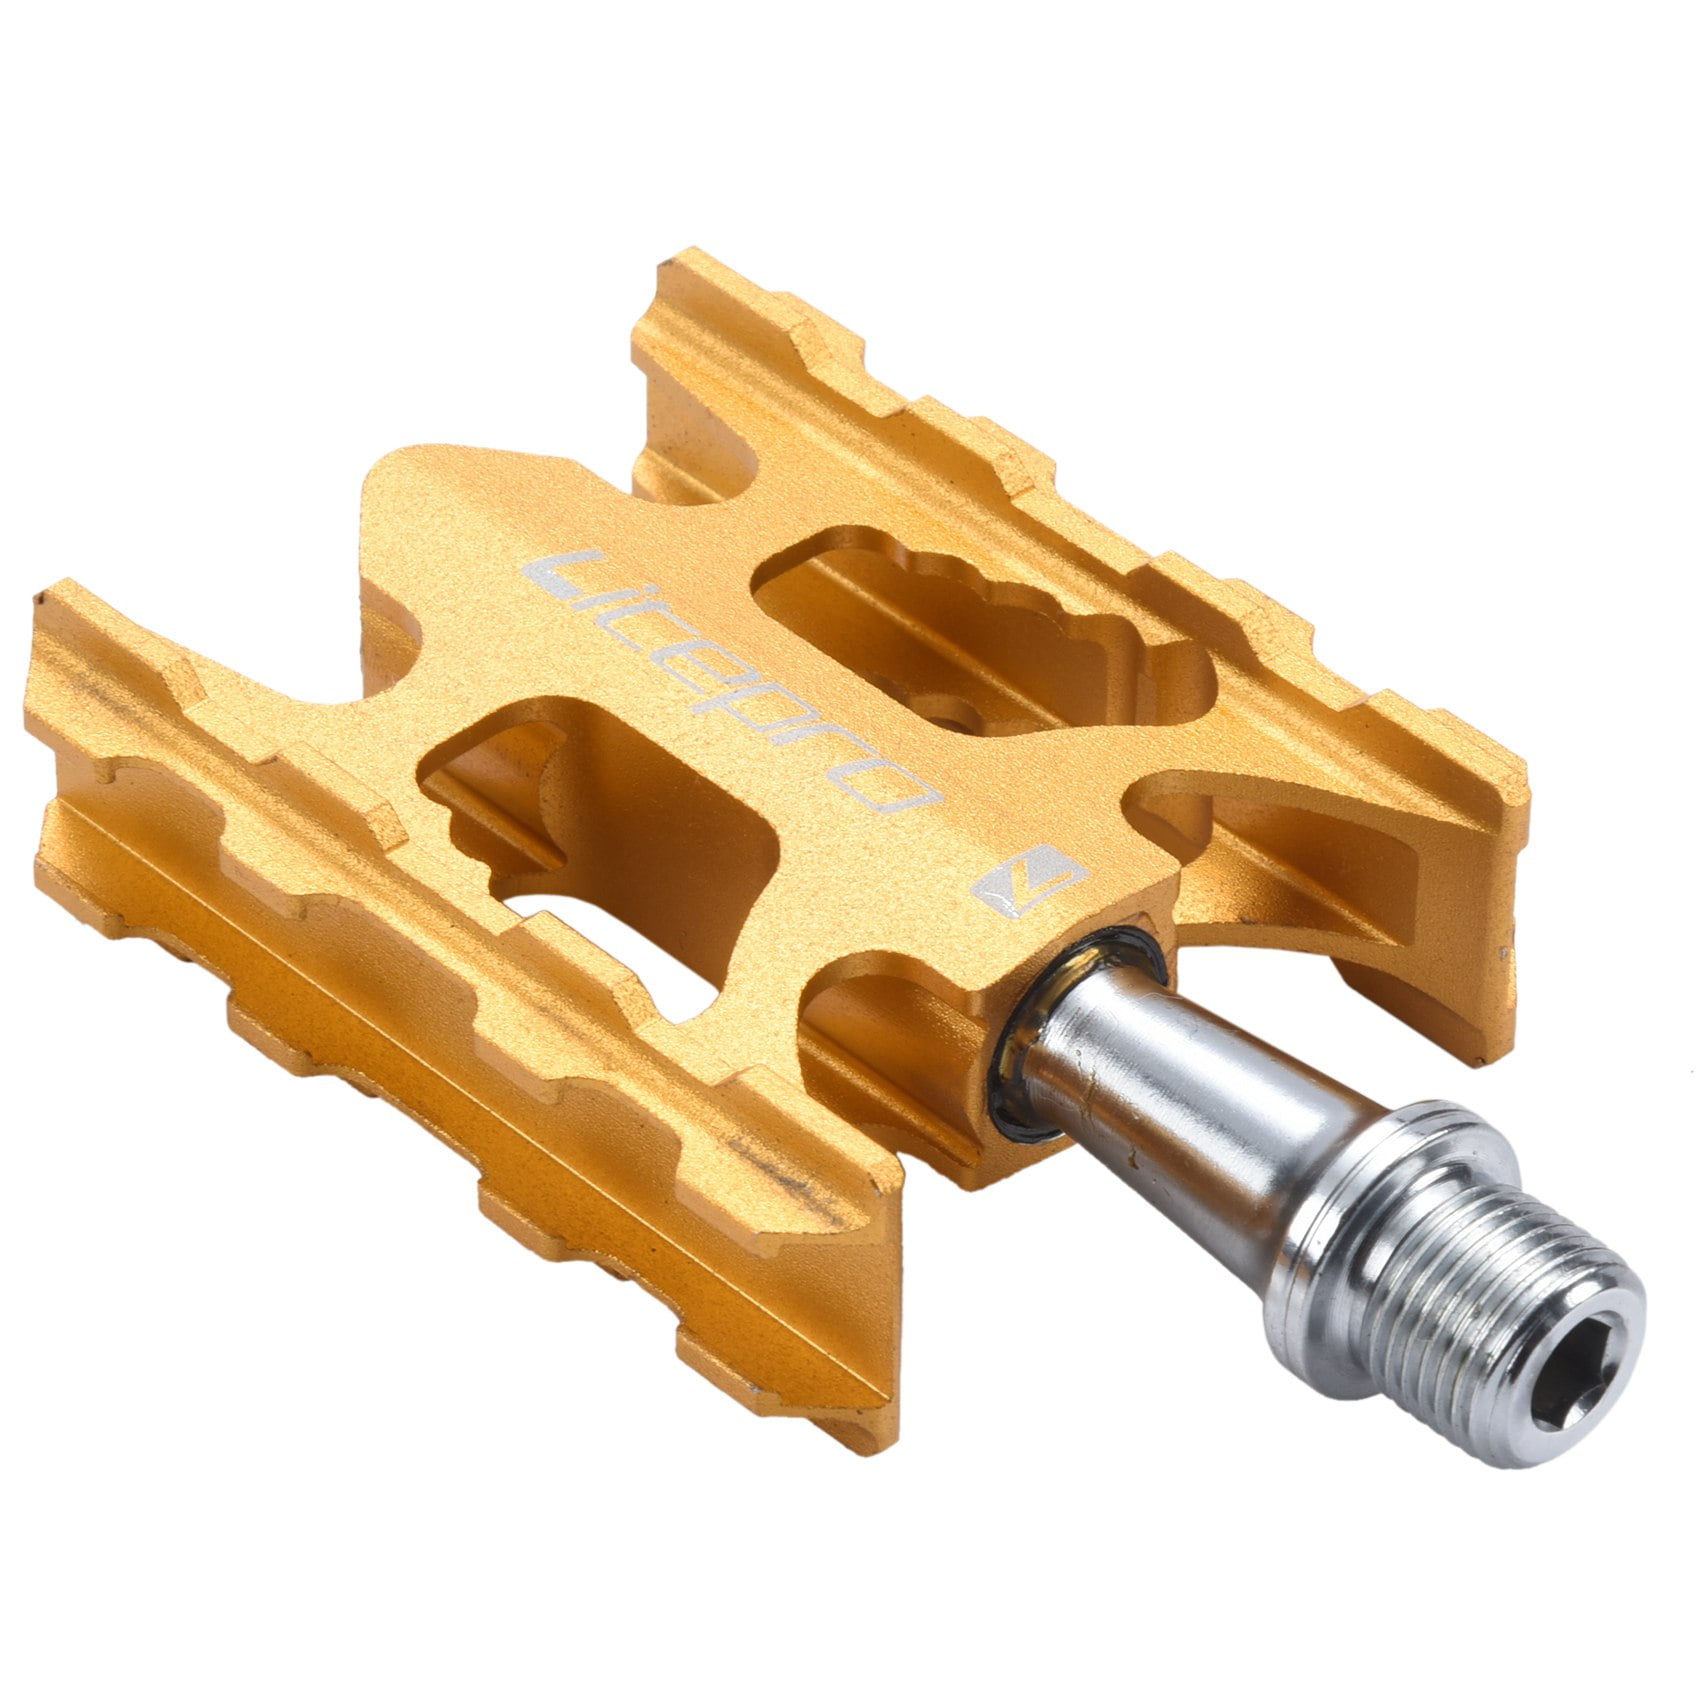 Details about   Litepro Bike Pedals Aluminum Alloy Ultralight Bea Pedal K3 for Brompton Gold 